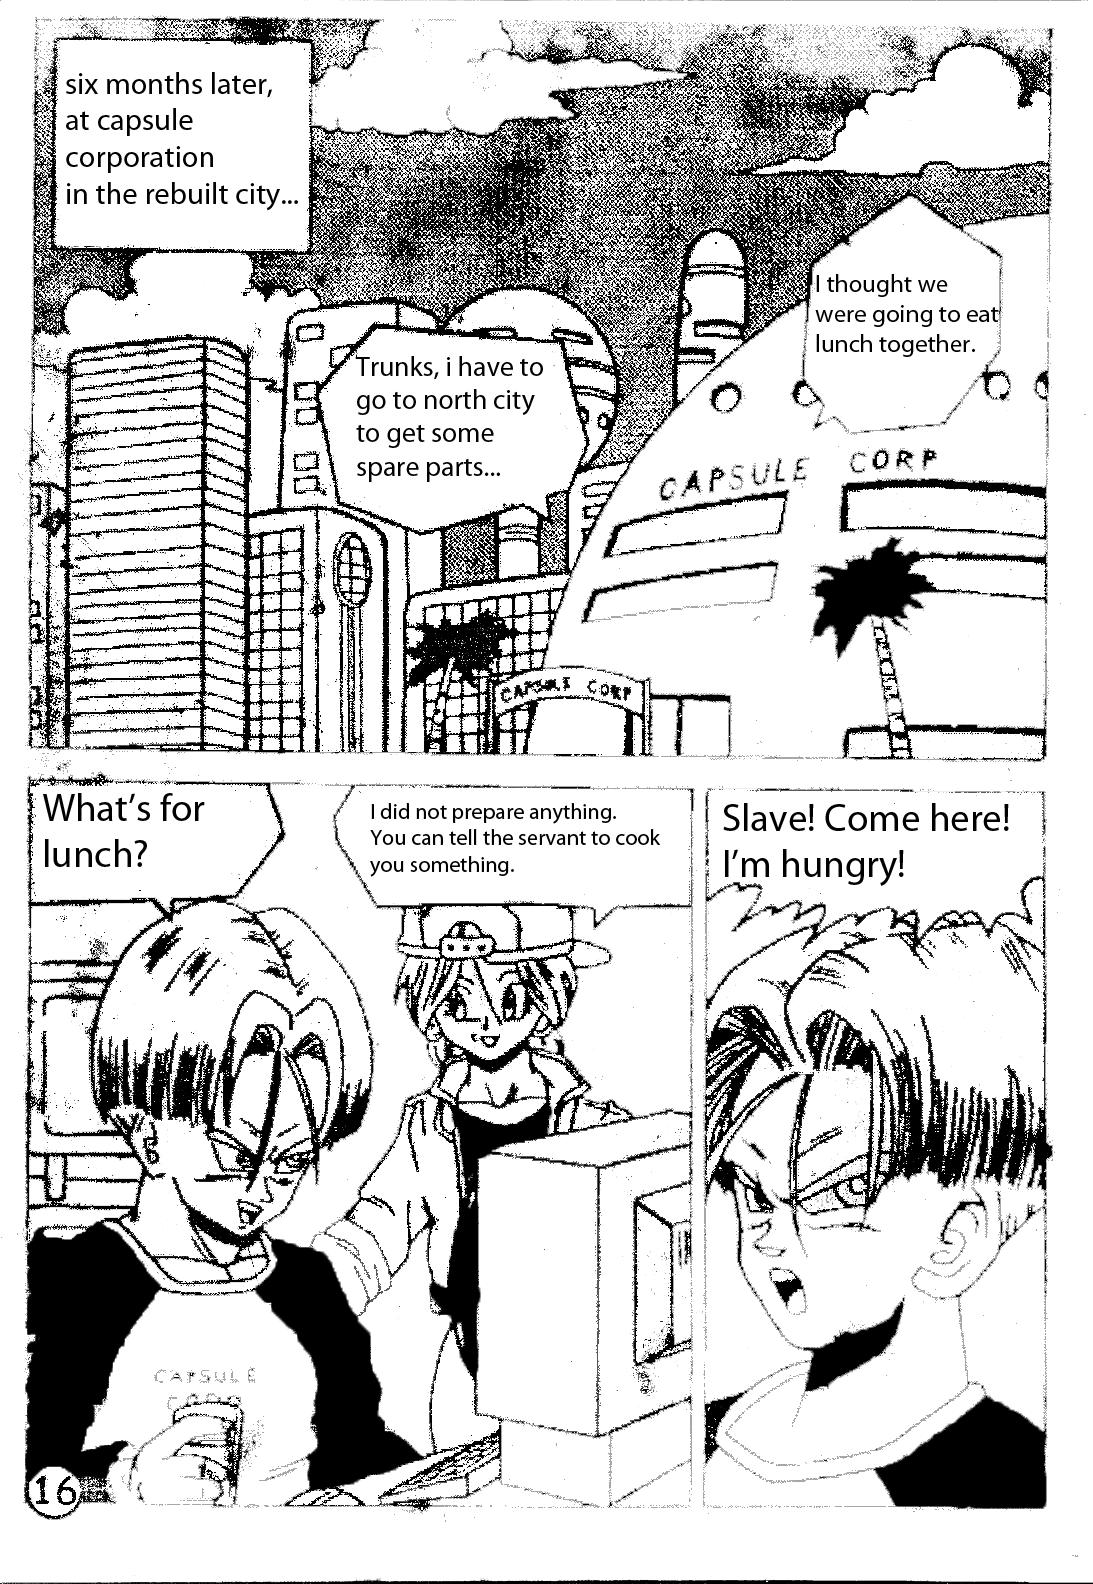 Flash Trunks and android 18 - Dragon ball z Enema - Page 17